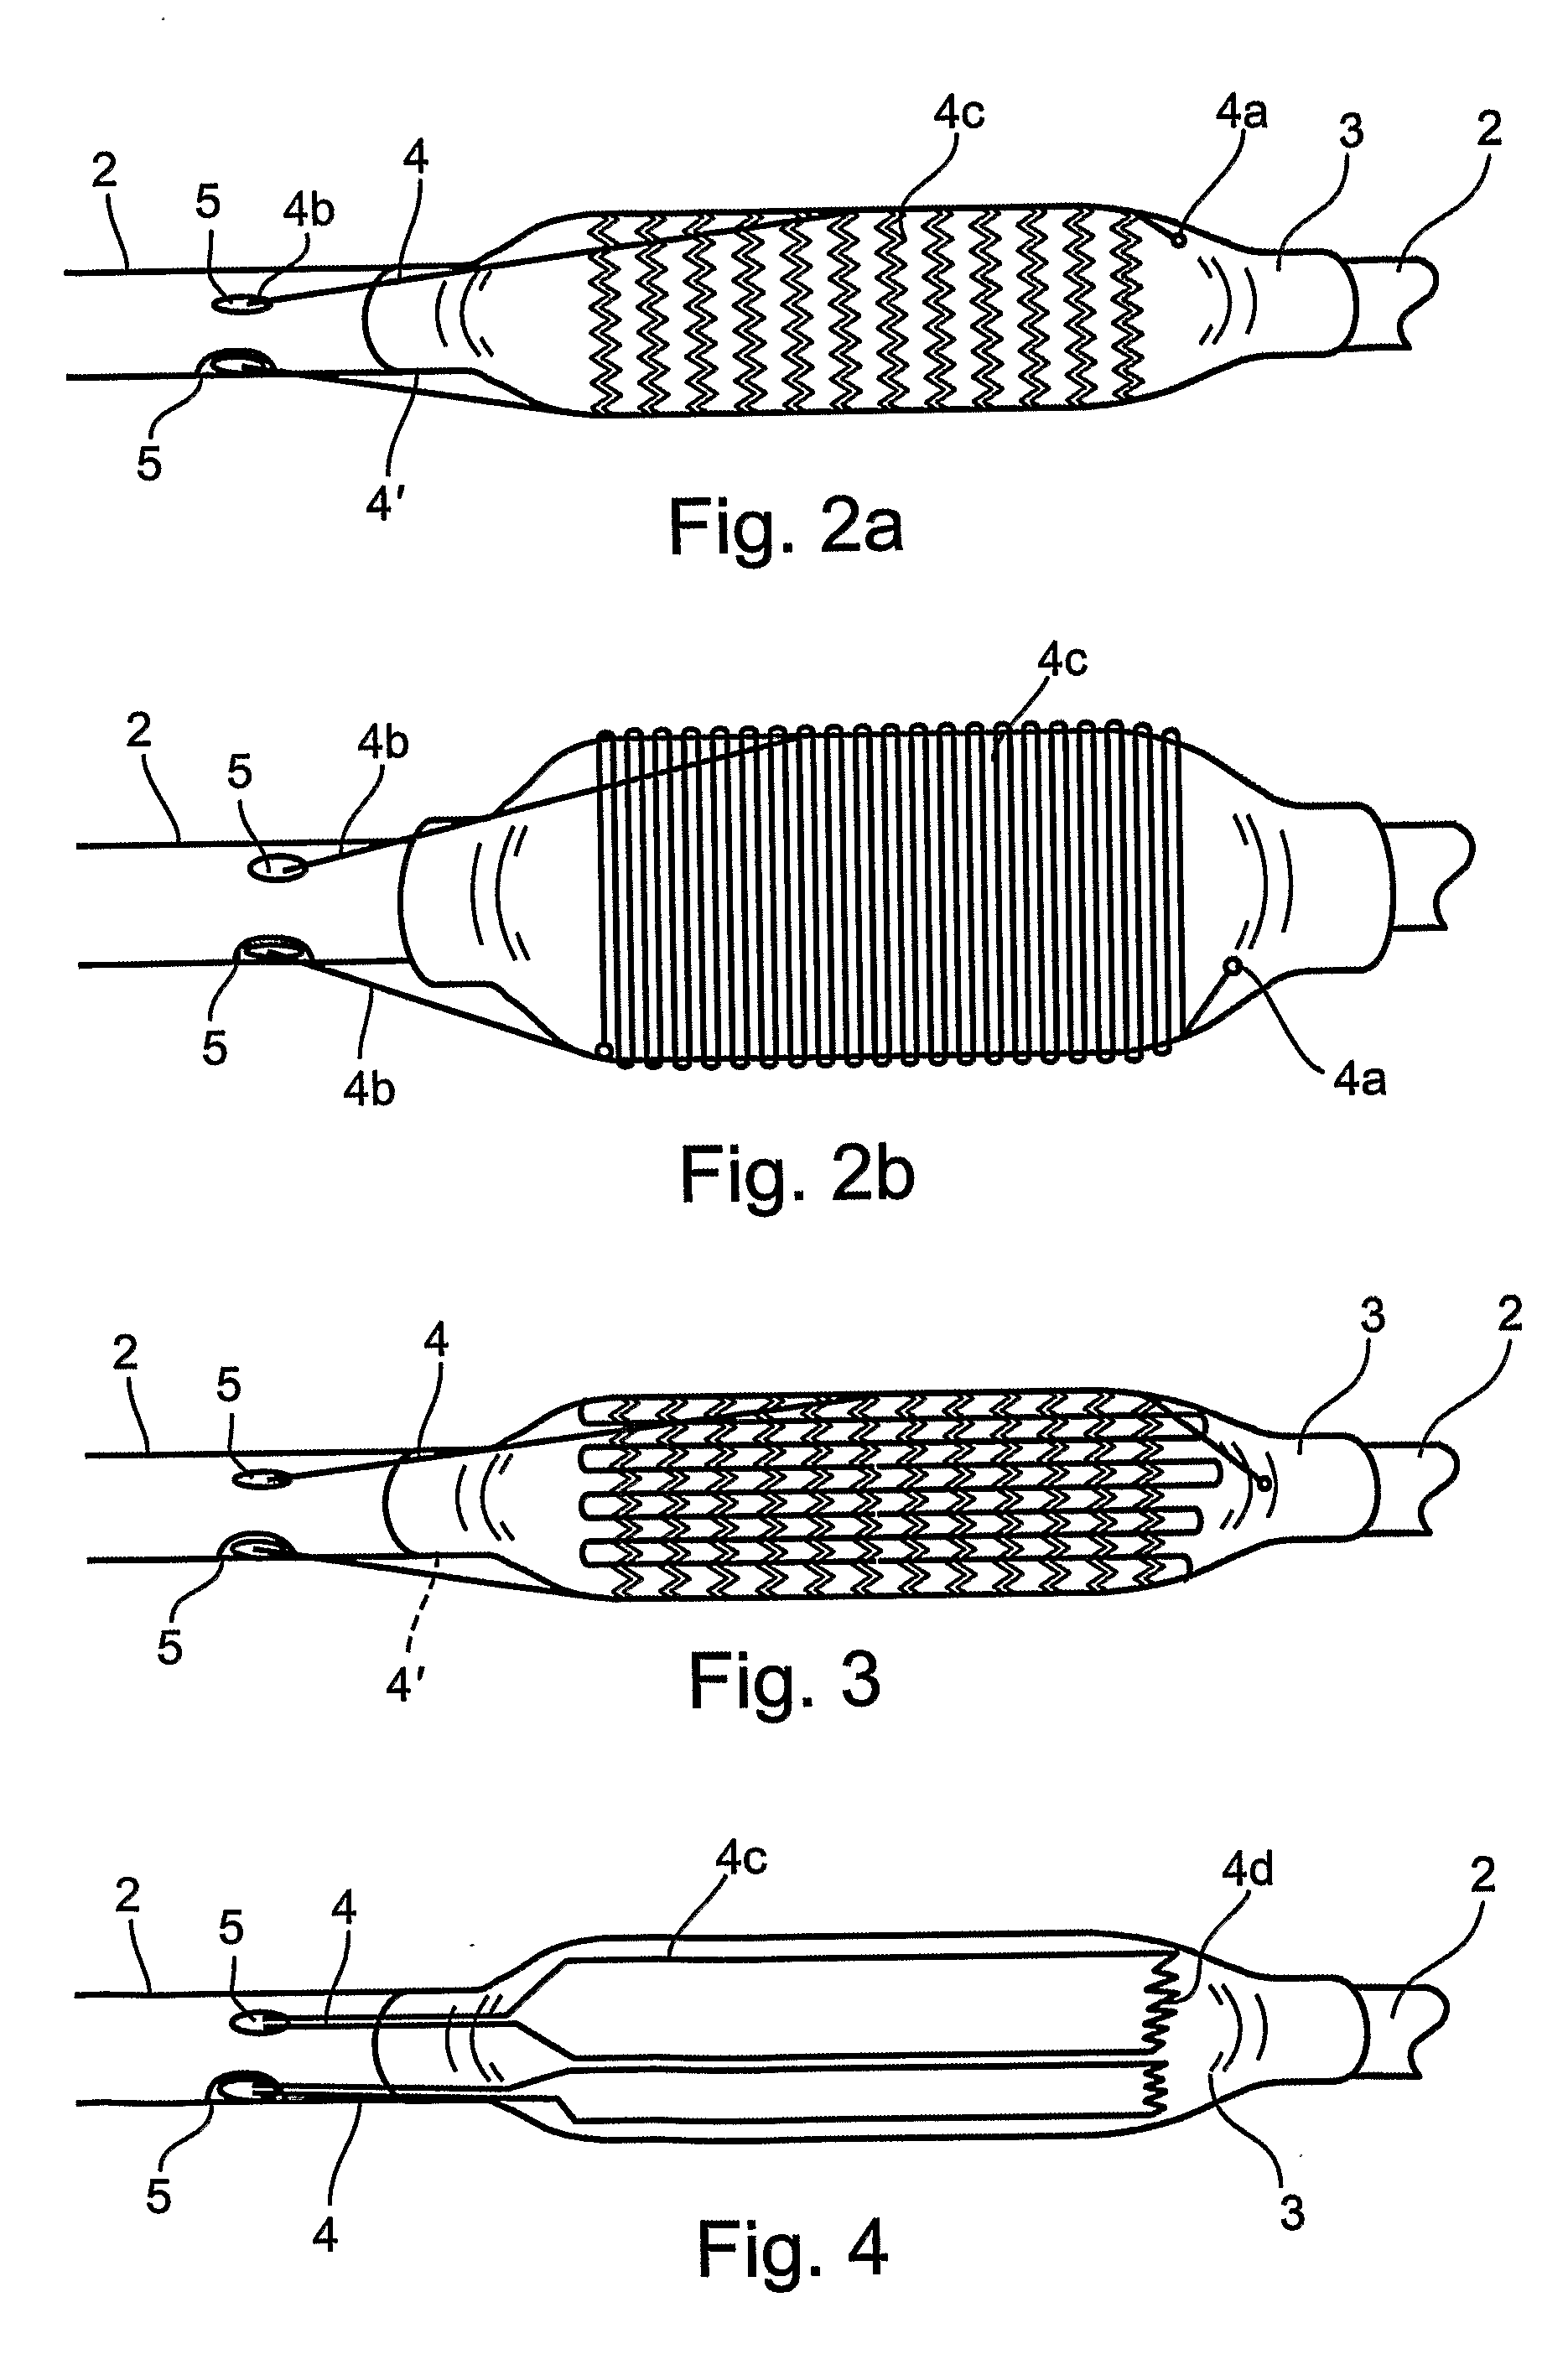 Apparatus and Method for Removing Deposits from Tubular Structure, Particularly Atheroma from Blood Vessels